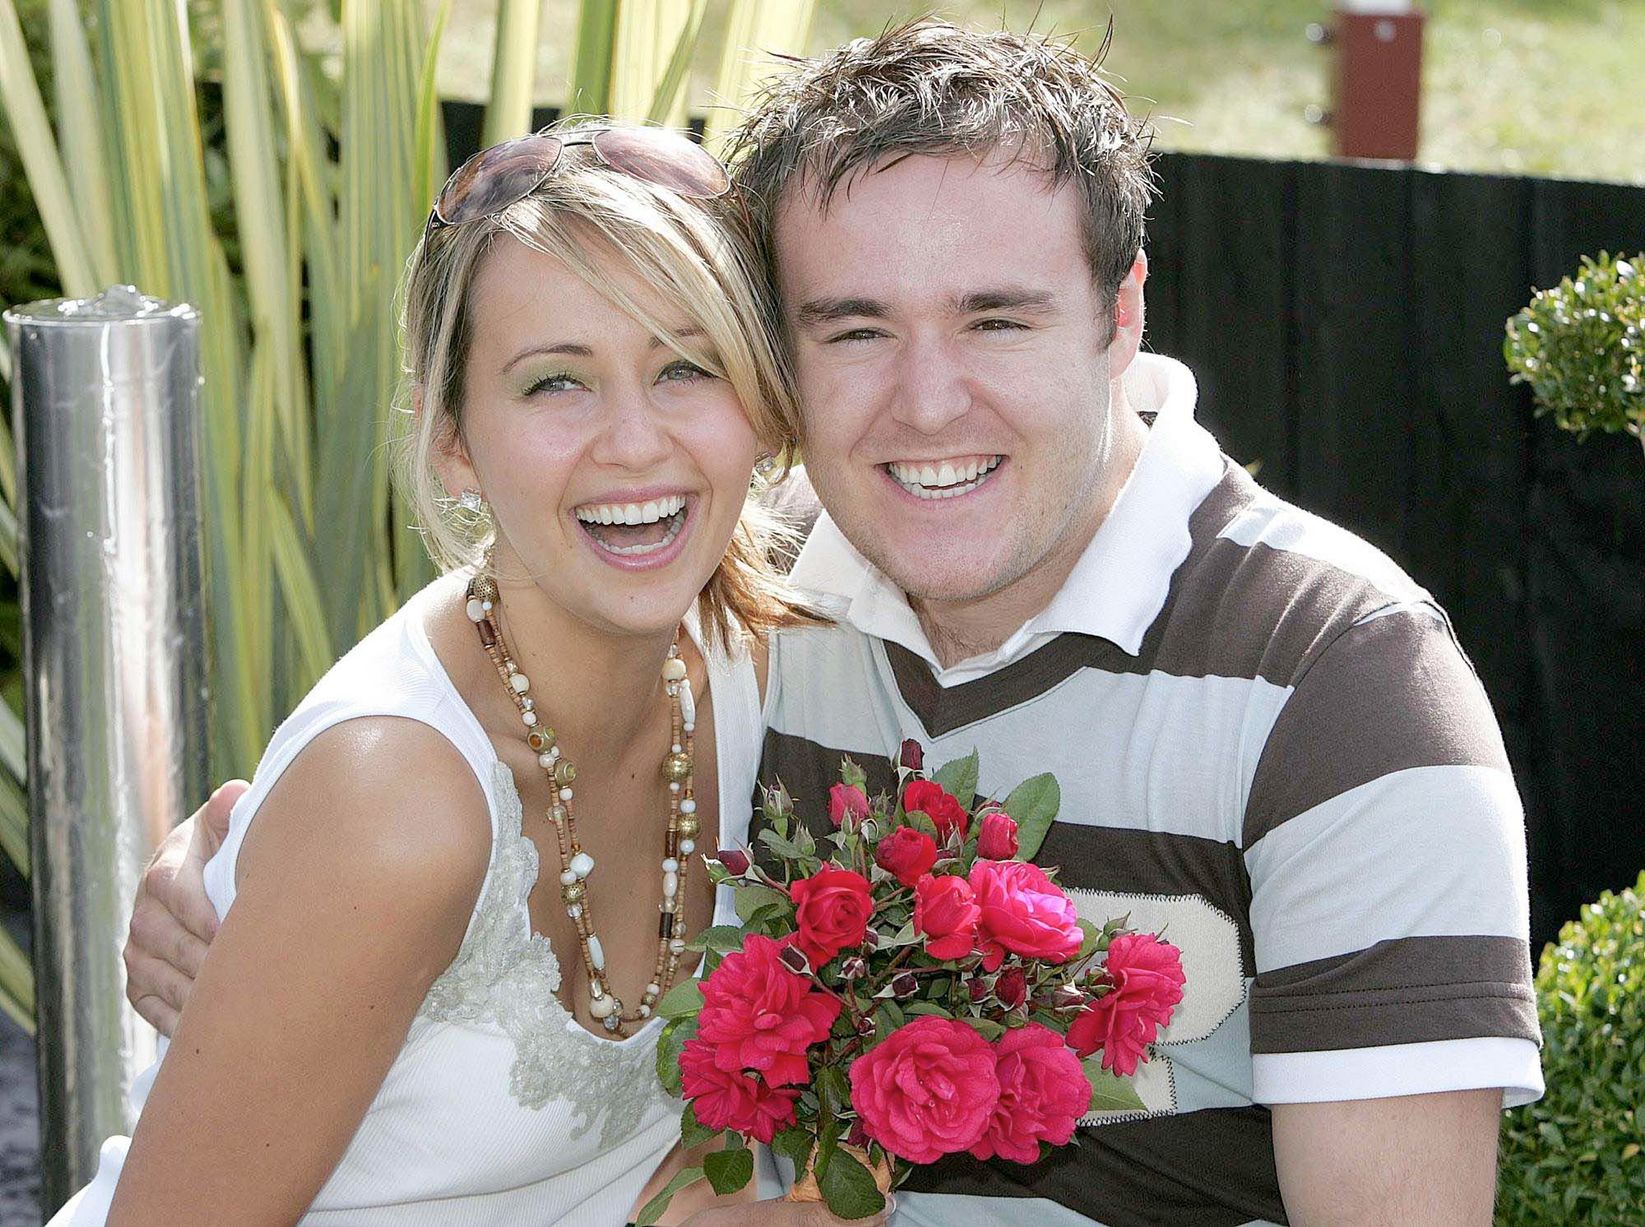 Samia Ghadie and Alan Halsall (Maria and Tyrone in Coronation Stree)t with the new Coronation Street rose at Southport Flower Show Friday August 19, 2005 to celebrate ITV's 50th anniversary. The bloom, named ITV 50th Anniversary Coronation Street Rose